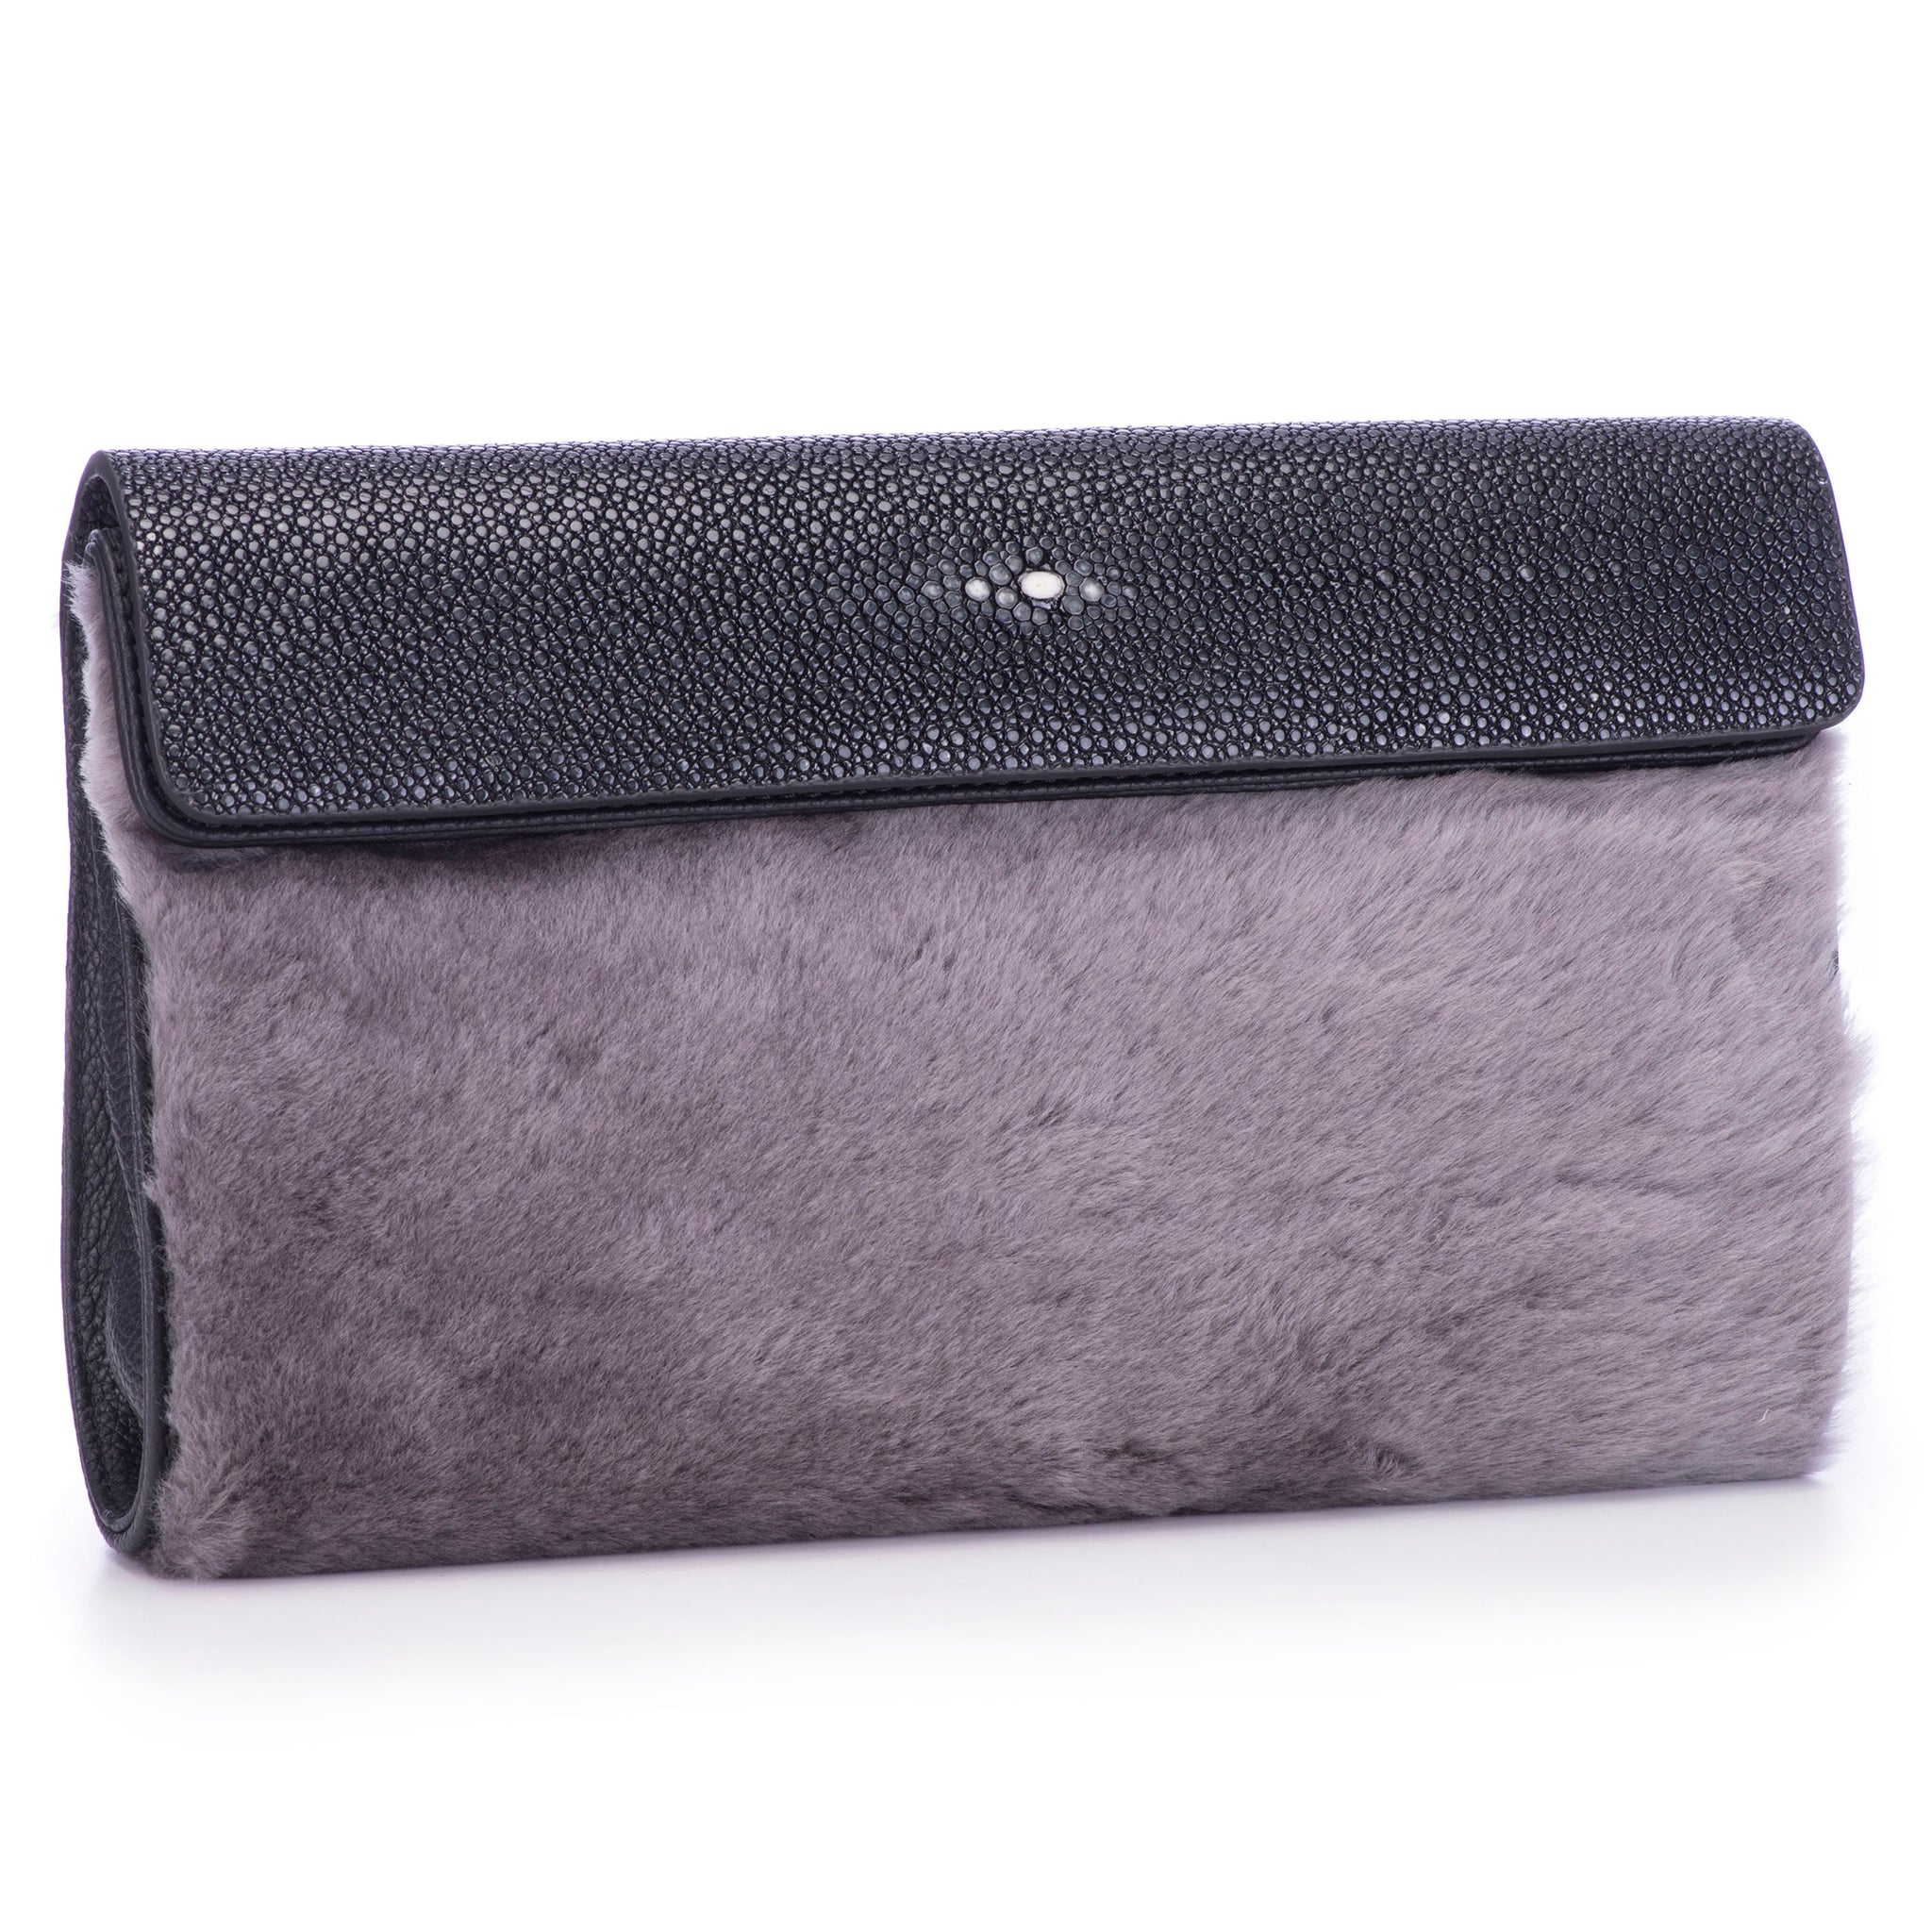 Black Shagreen Dark Gray Shearling Body Detachable Chain Holly Oversize Clutch Front Side View - Vivo Direct